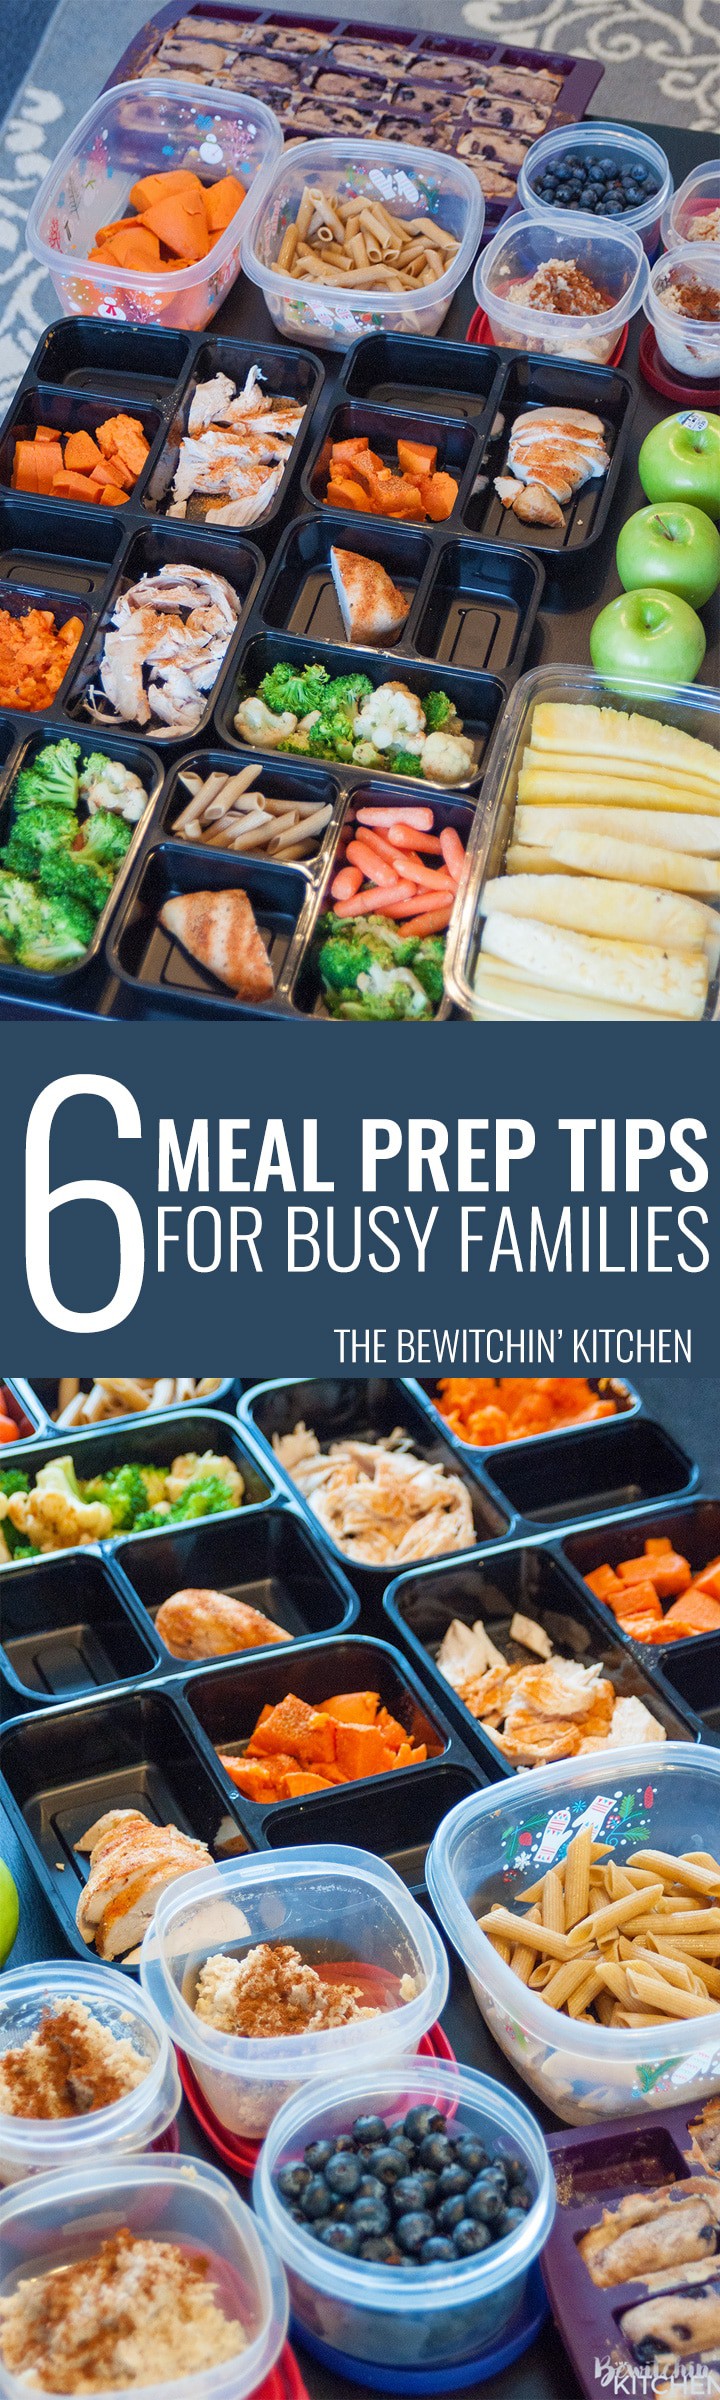 6 Meal Prep Tips For Busy Families The Bewitchin Kitchen